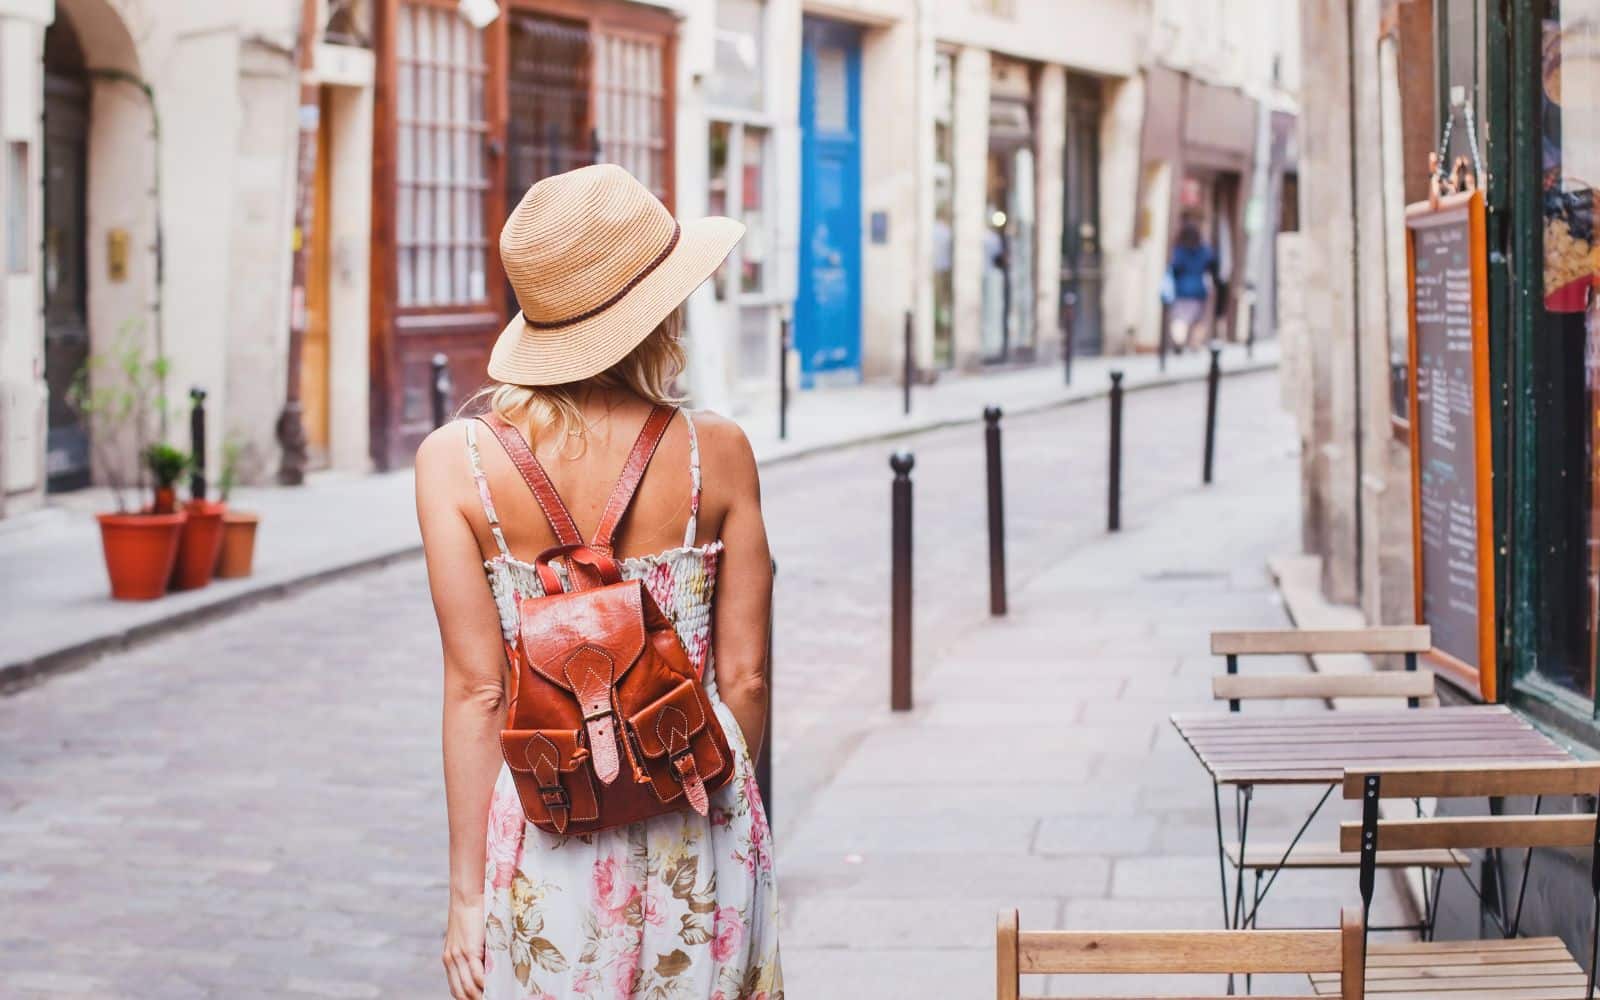 New Data Reveals 5 Safest Countries For Female Digital Nomads in 2022